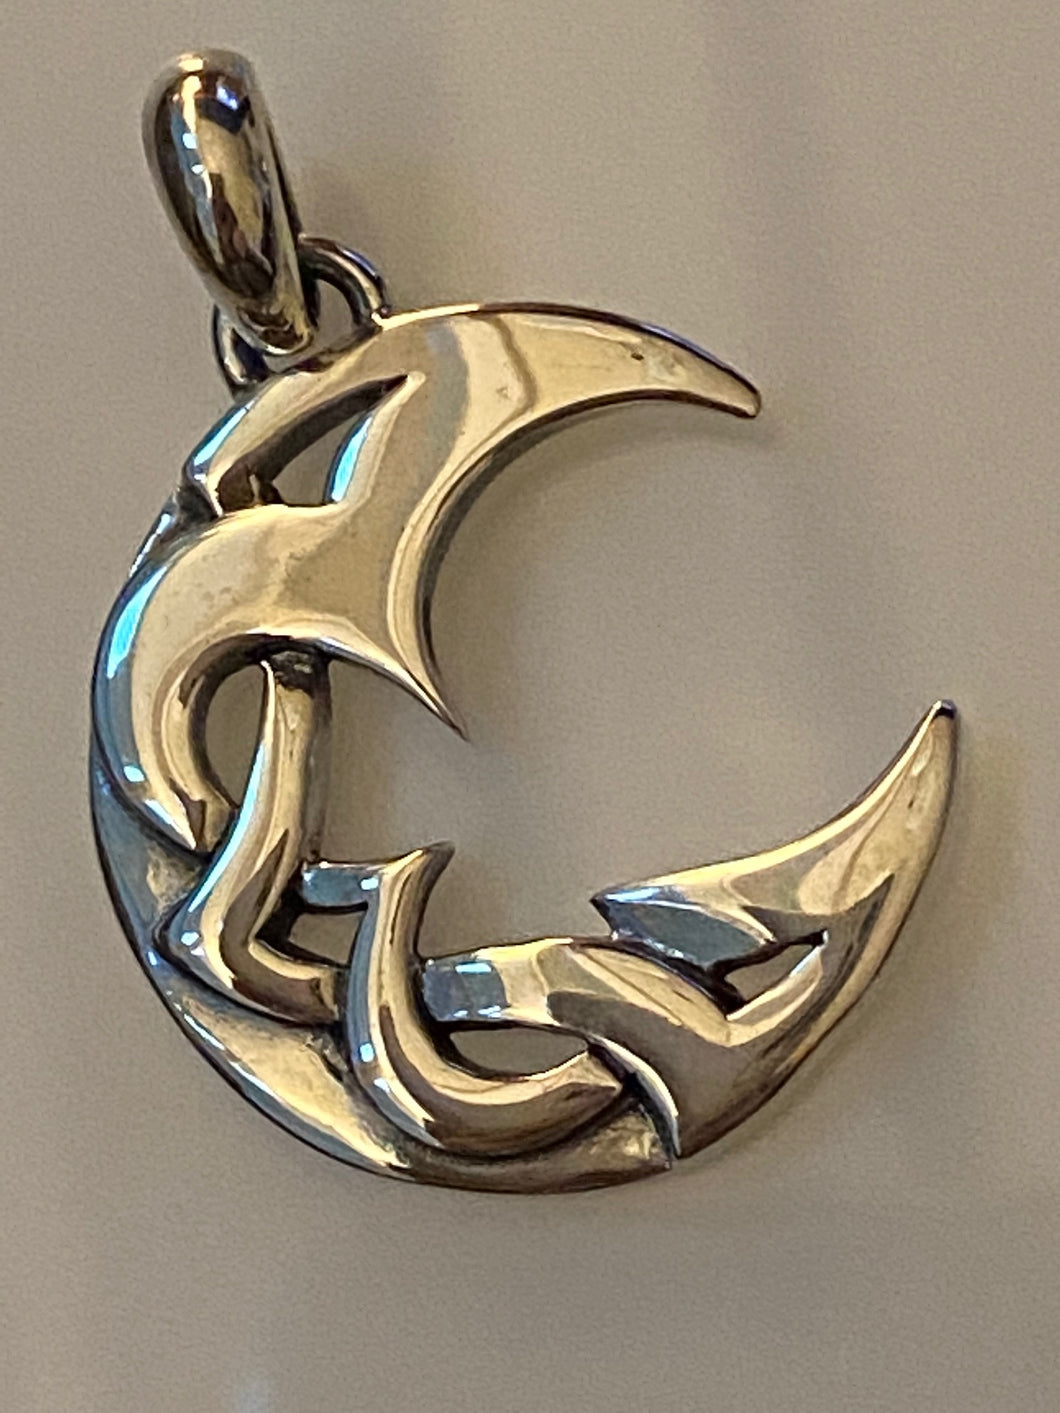 Moon Pendant 925 Sterling Silver Jewelry. Free Silver Plated Chain. Free Shipping!